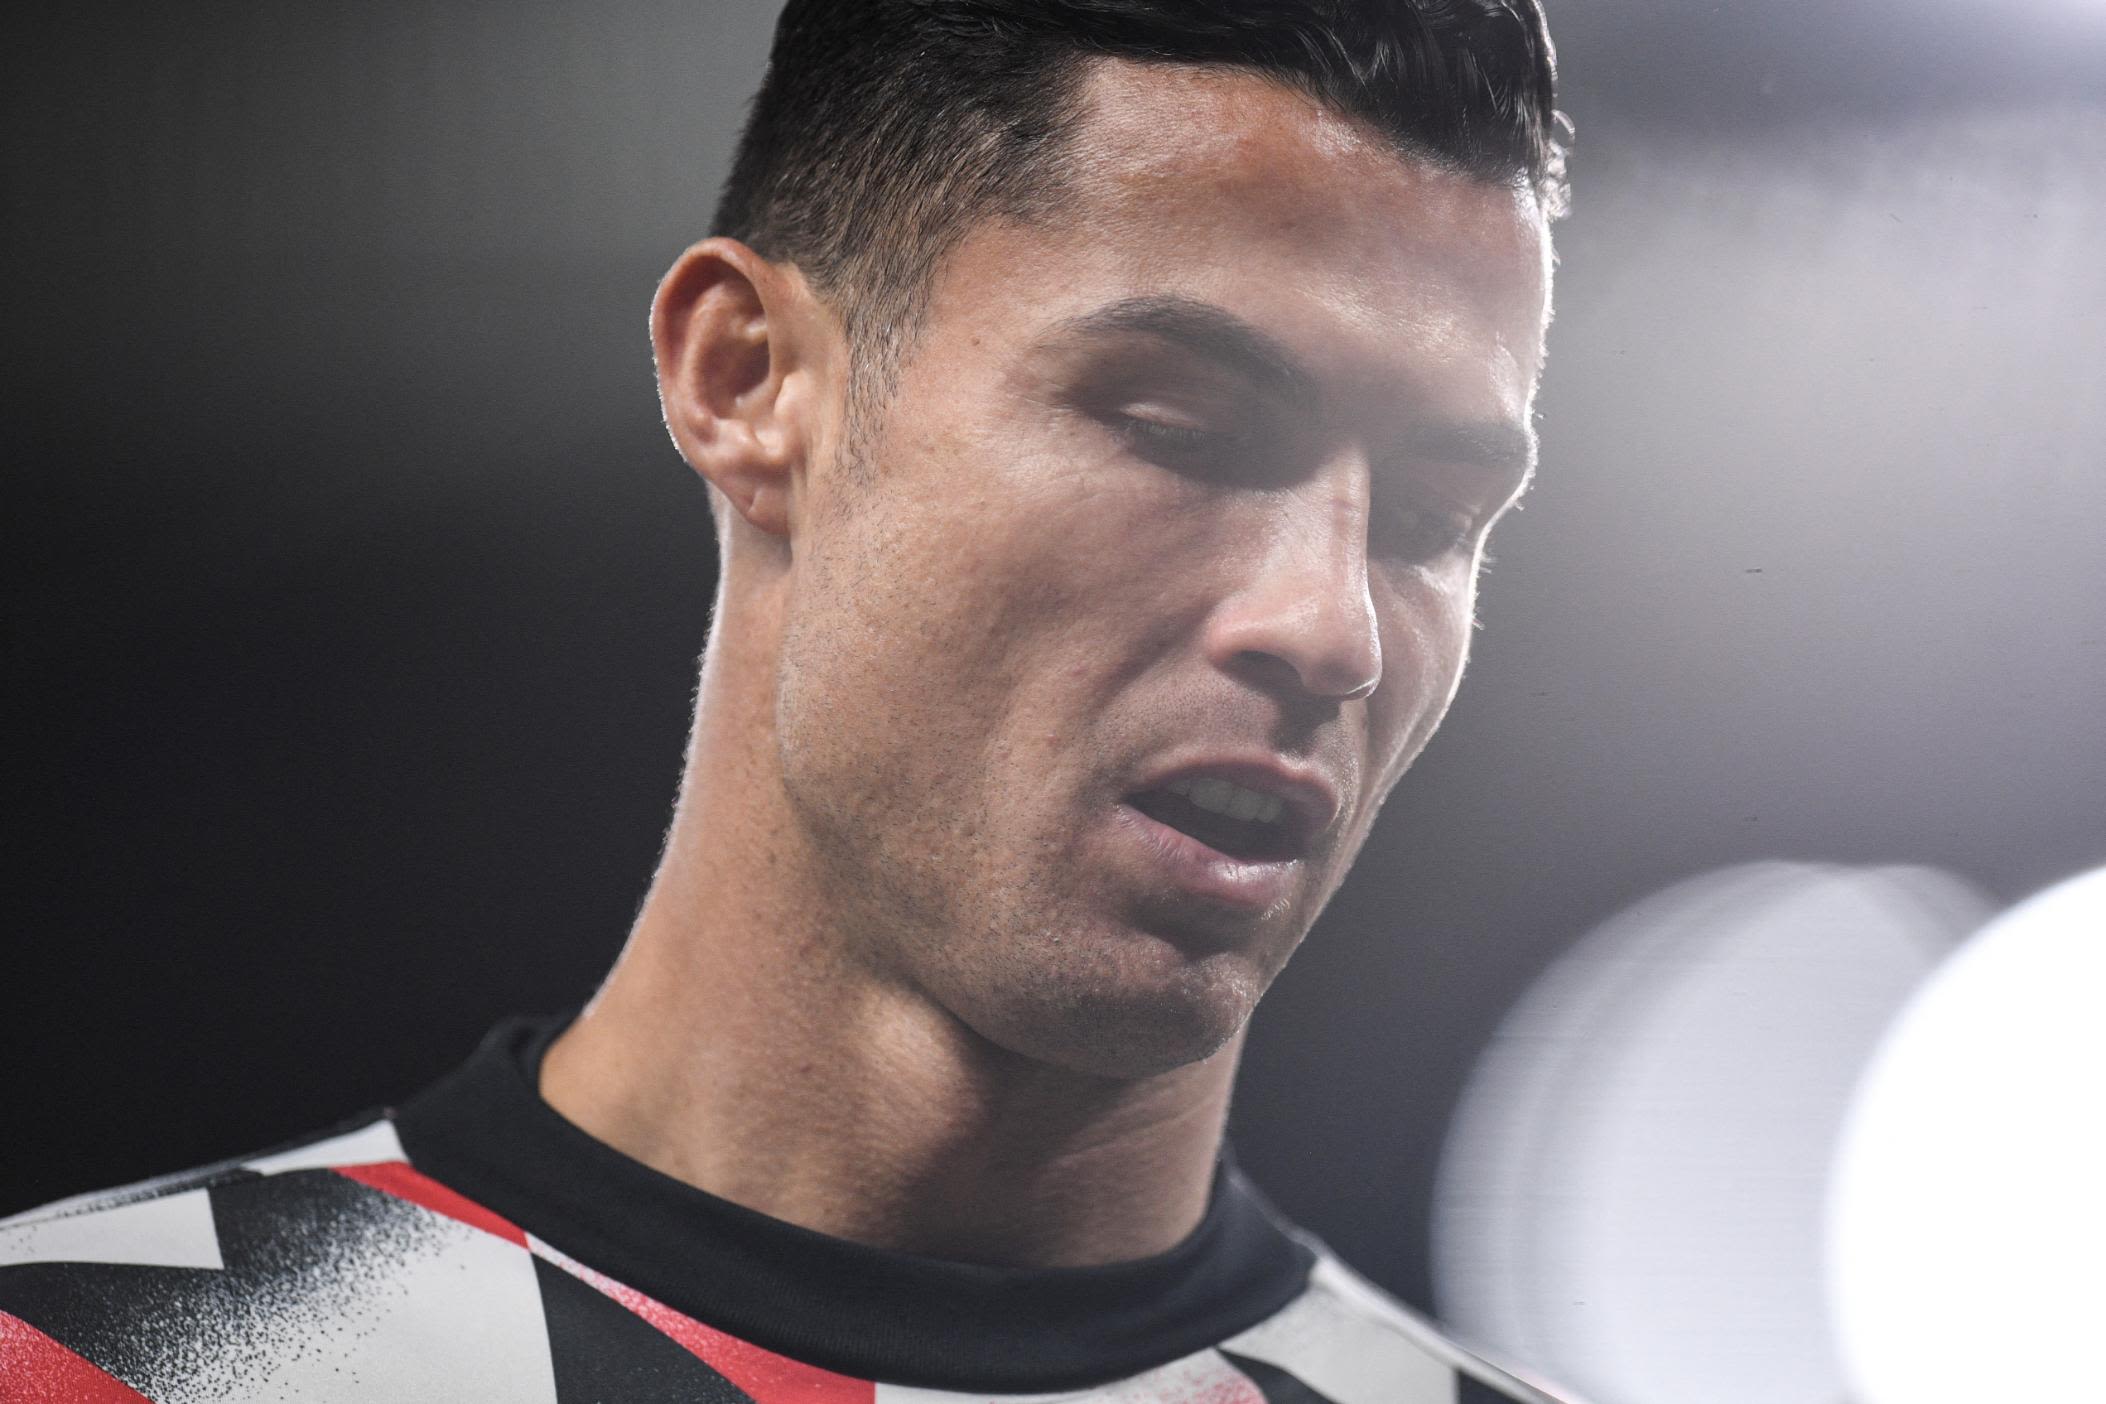 Cristiano Ronaldo blames 'heat of the moment' after leaving Manchester  United match early | CNN